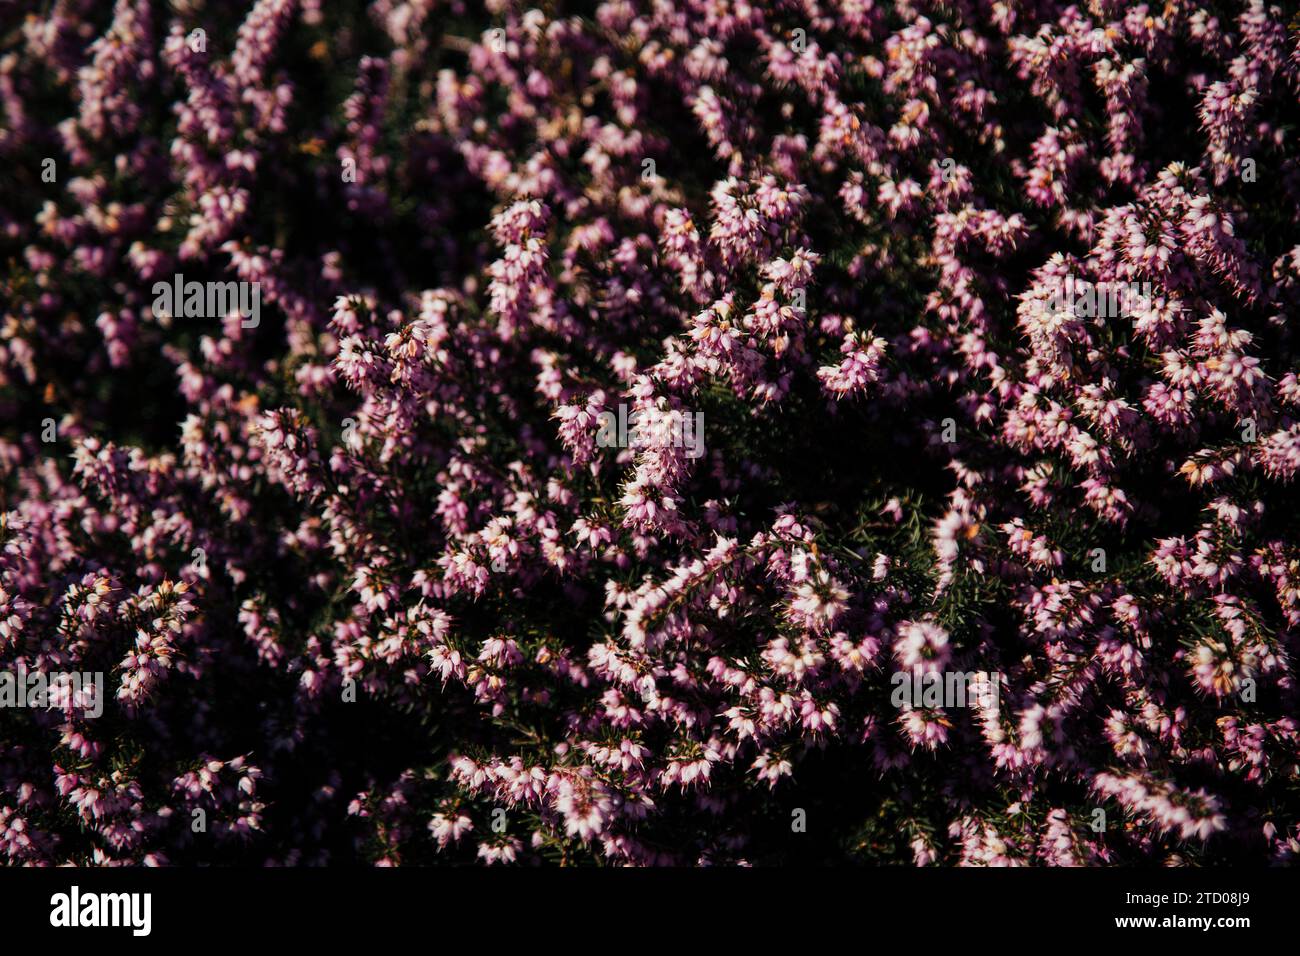 Close up details of small purple flowers in British Columbia Garden Stock Photo